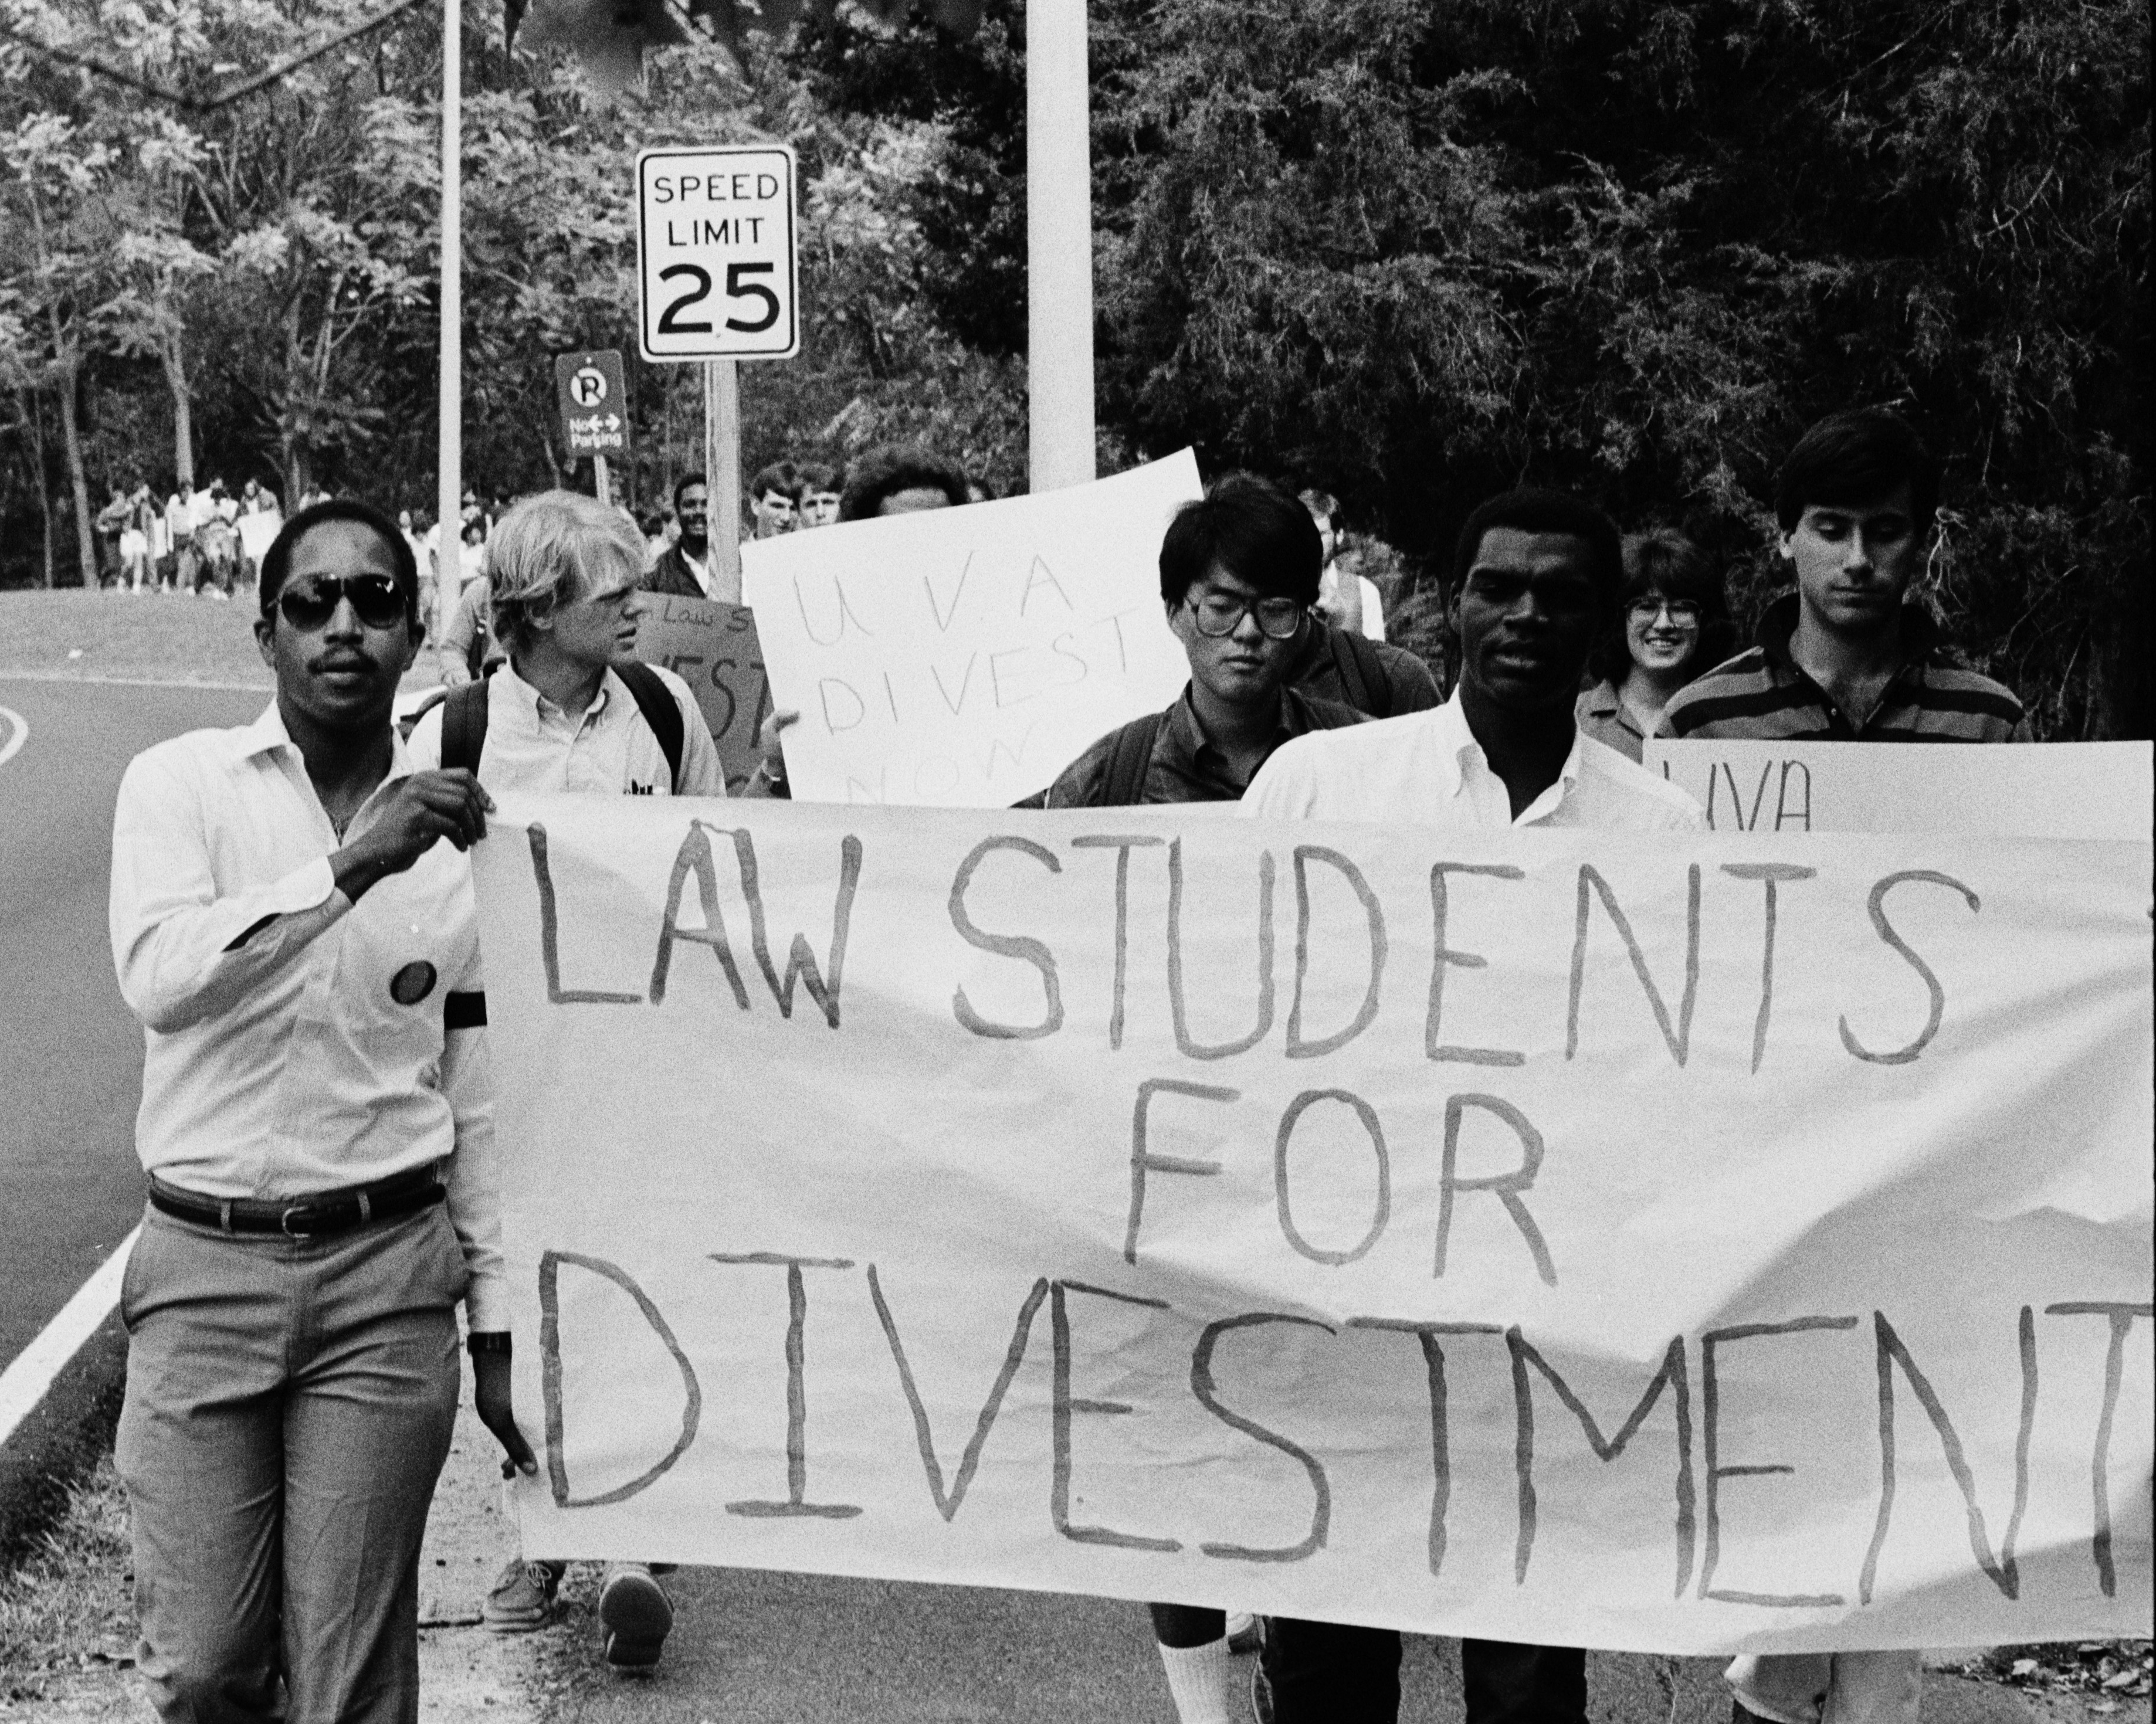 Law Students for Divestment, 1987